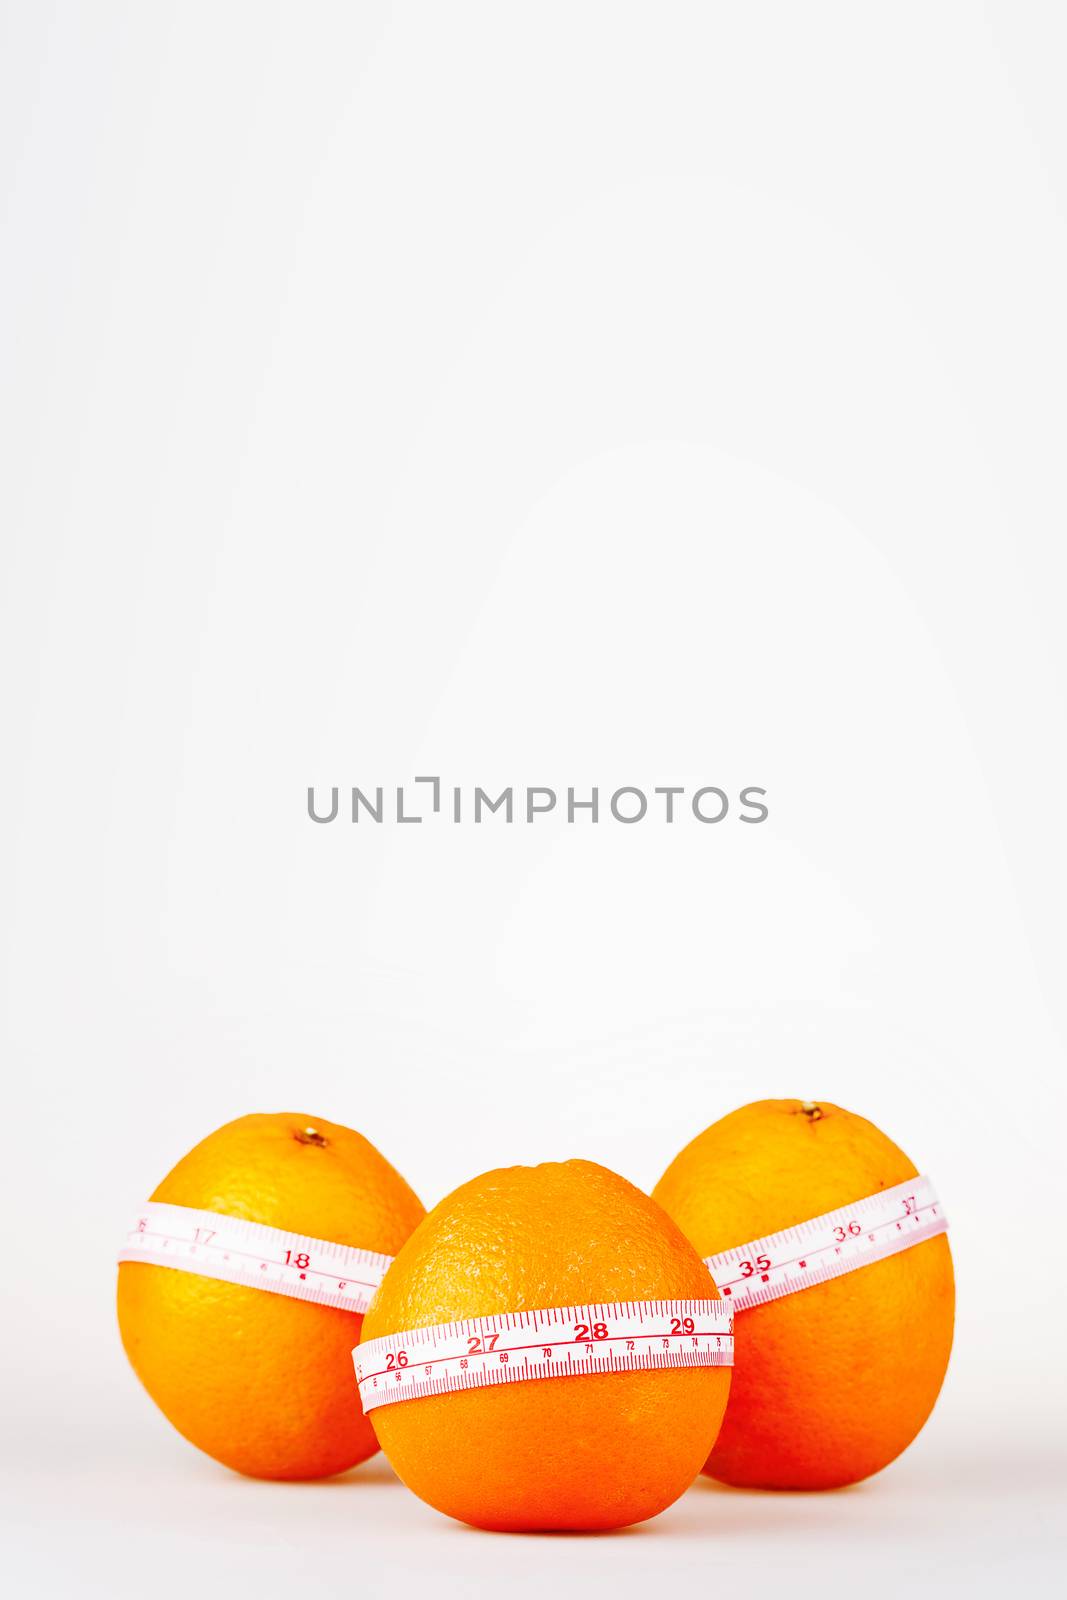 Three oranges with tailor's ruler. Orange diet. Fruit healhy vitamin diet helps to lose weight. Place for text.